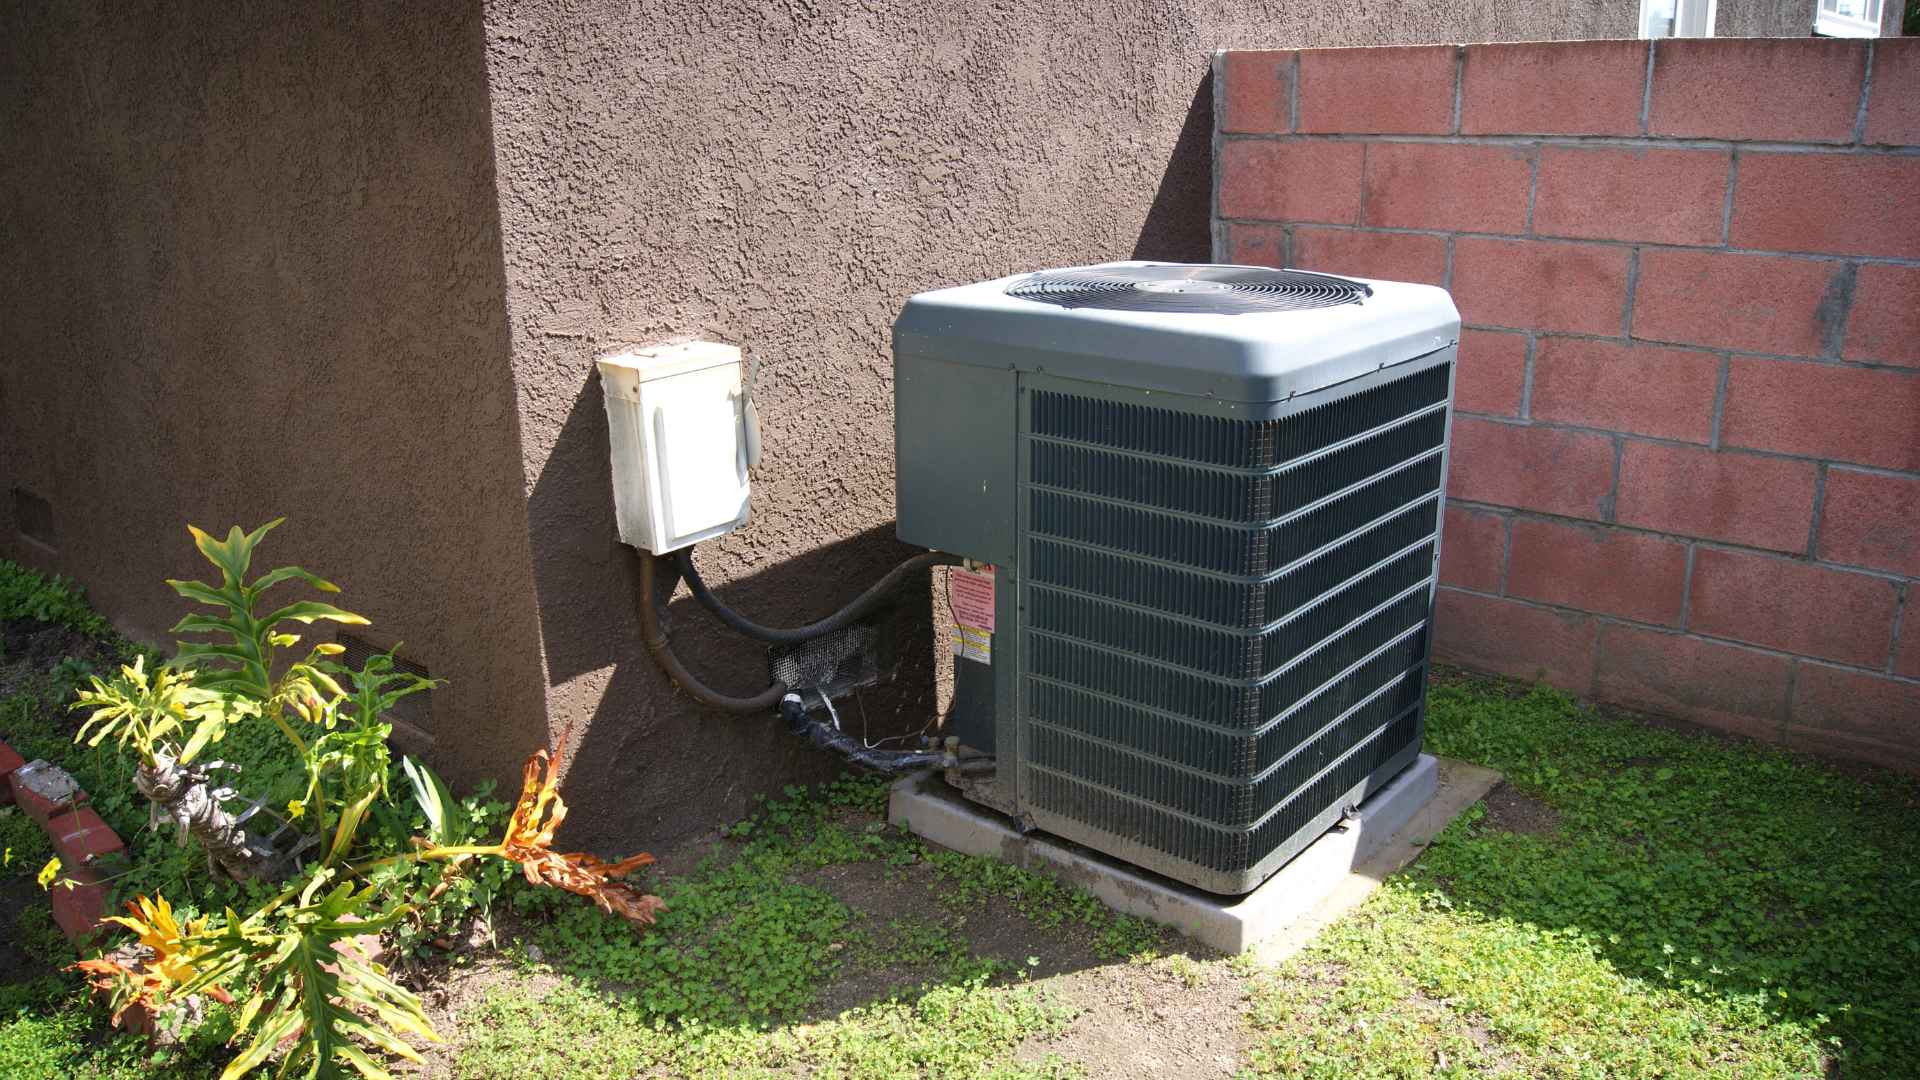 Central air conditioning unit installed on a grassy patch beside a brick wall and a small plant, with exposed electrical wiring and conduit.